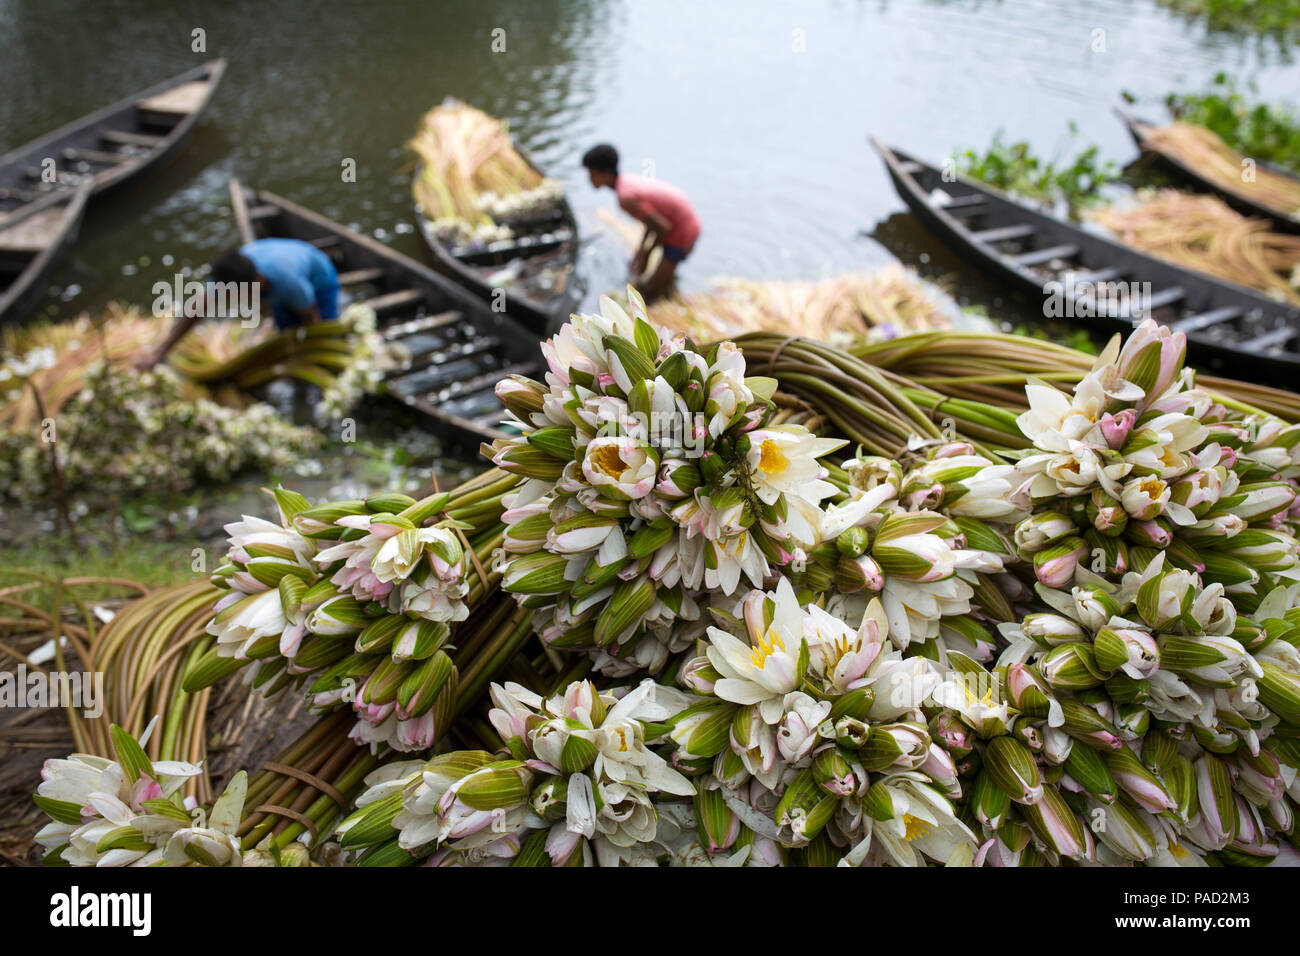 Dhaka, Bangladesh. 21 July 2018. Bangladeshi people process water lily to sell them in market near in Dhaka , Bangladesh on July 21, 2018.  Almost three-quarters of the population live in rural areas. Families in rural Bangladesh rely primarily on agriculture,poultry and fishing for their daily income..At the Sustainable Development Summit on 25 September, 2015, UN Member States will adopt the 2030 Agenda for Sustainable Development, which includes a set of 17 Sustainable Development Goals (SDGs) to end poverty, fight inequality and injustice, and tackle climate change by 2030..Prime Minister  Stock Photo